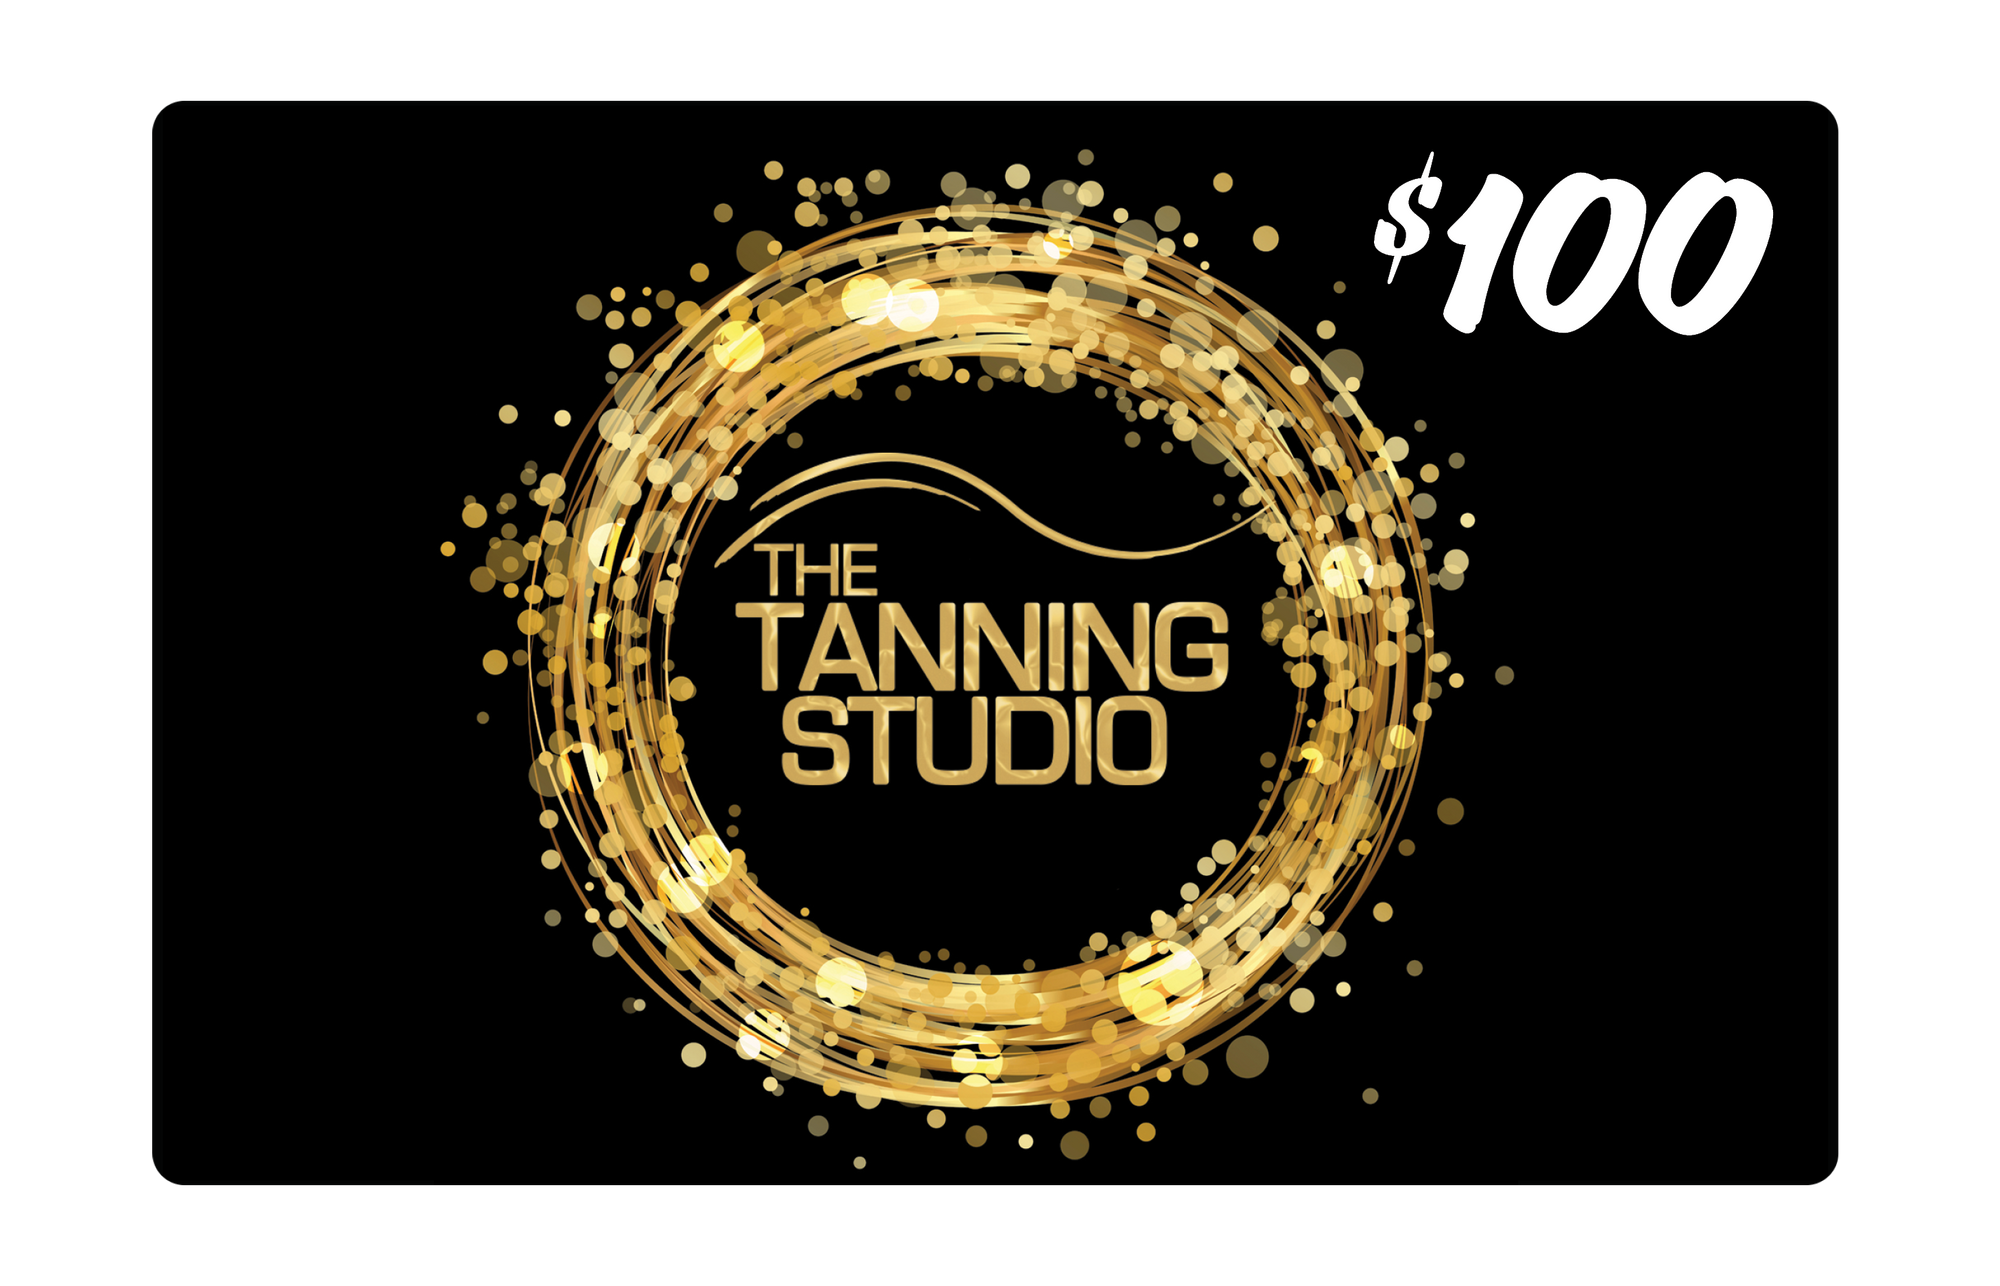 Tanning Gift Cards